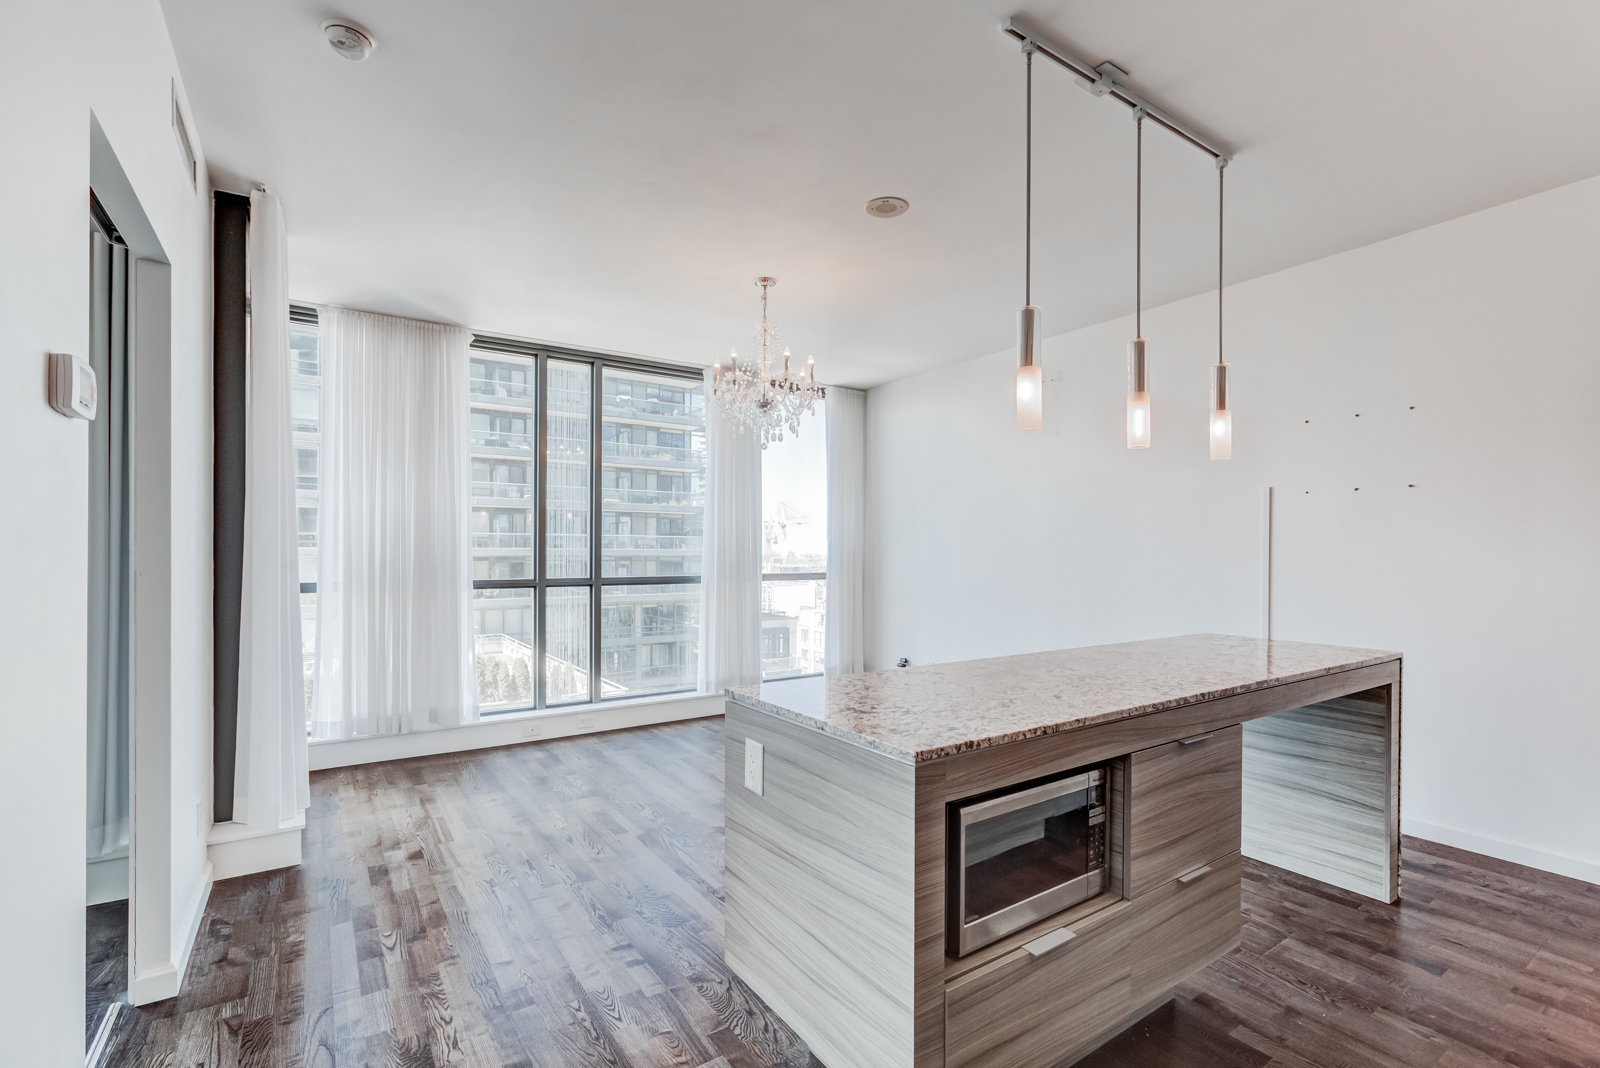  Brightly lit condo living room and kitchen island with hanging lights.